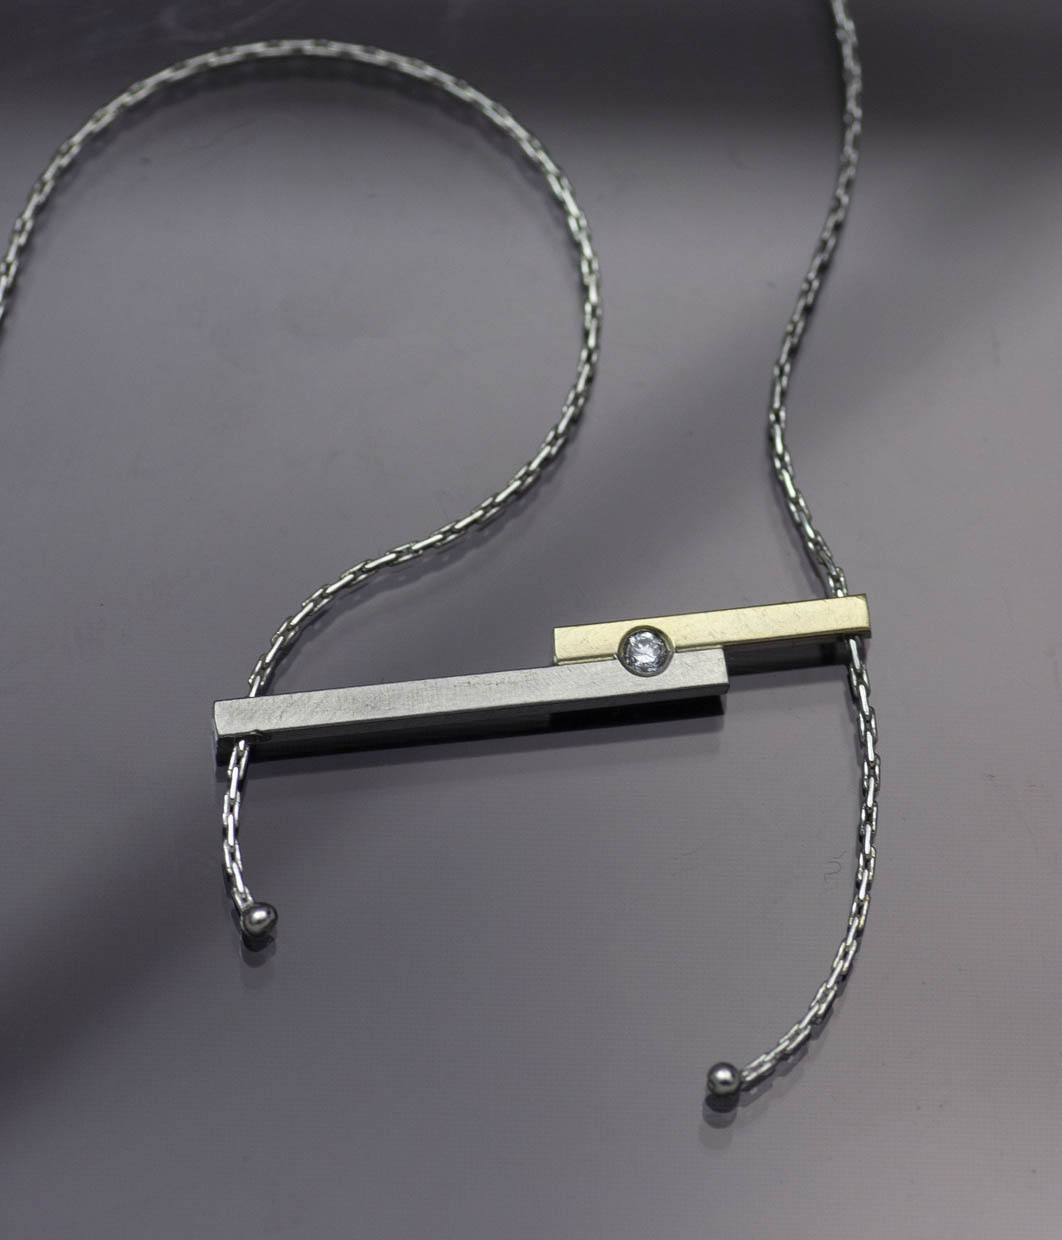 Lolide Seattle USA is a lesbian, gay, queer LGBTQIA+ wedding and engagement jeweler crafting this fused double bar necklace